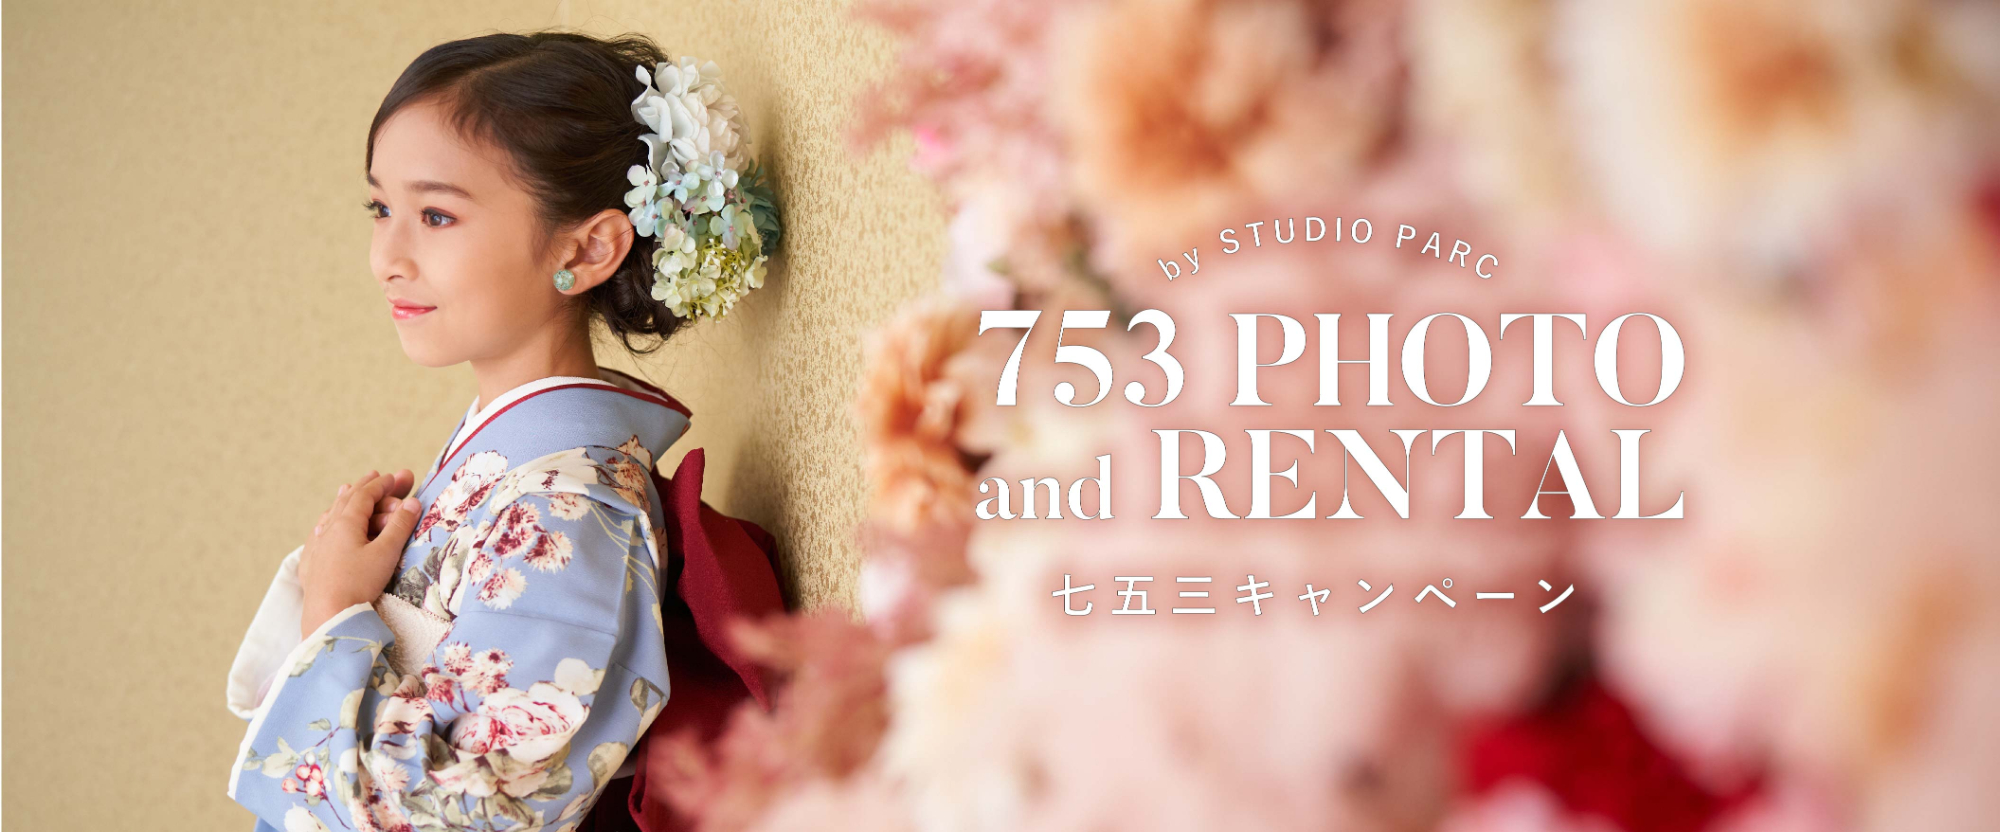 753 PHOTO and RENTAL 七五三キャンペーン by STUDIOnPARC